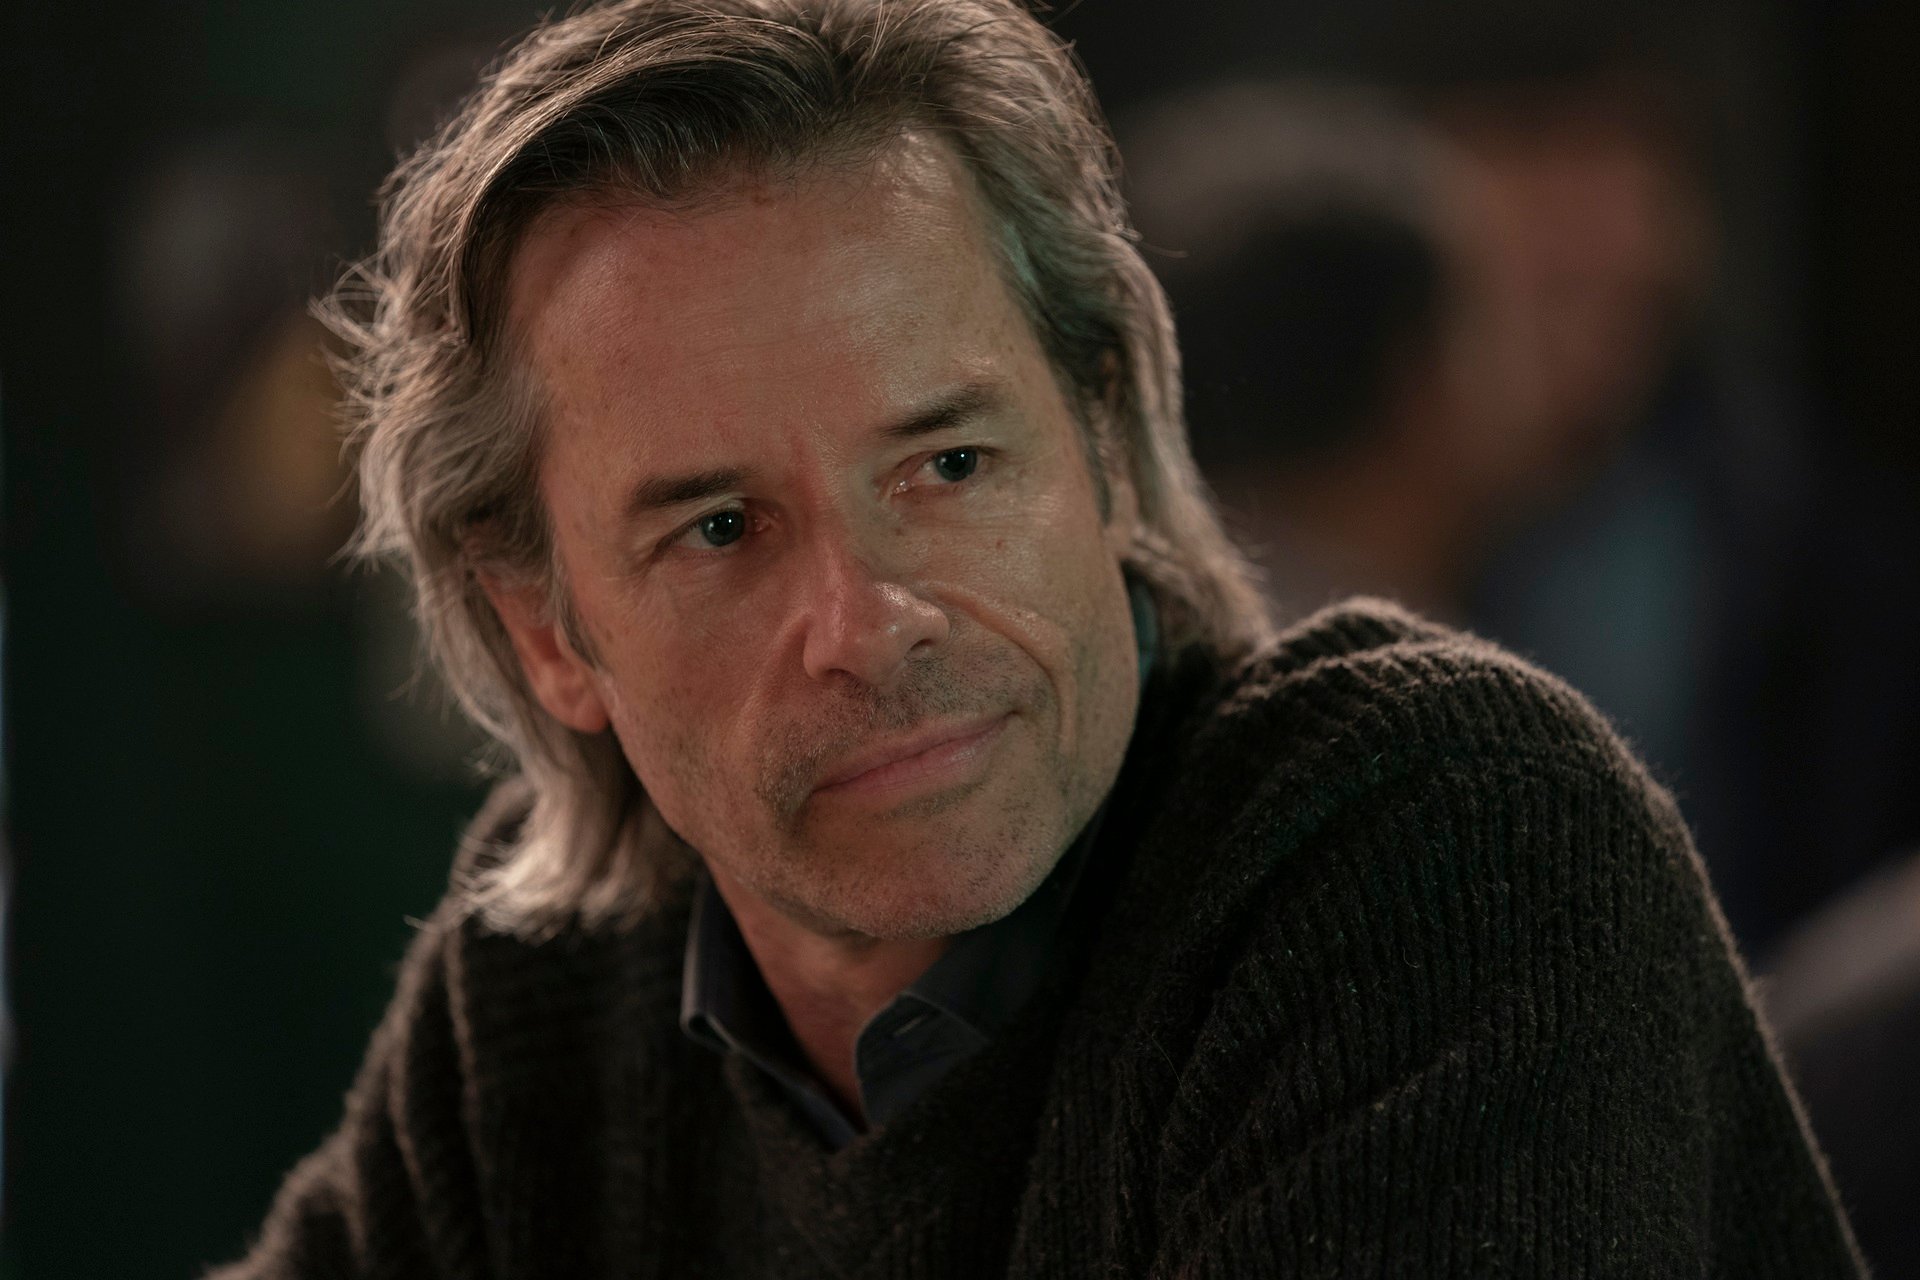 ‘Mare of Easttown’ Guy Pearce Explains How His Role Was ‘Quite Integral’ to the Plot